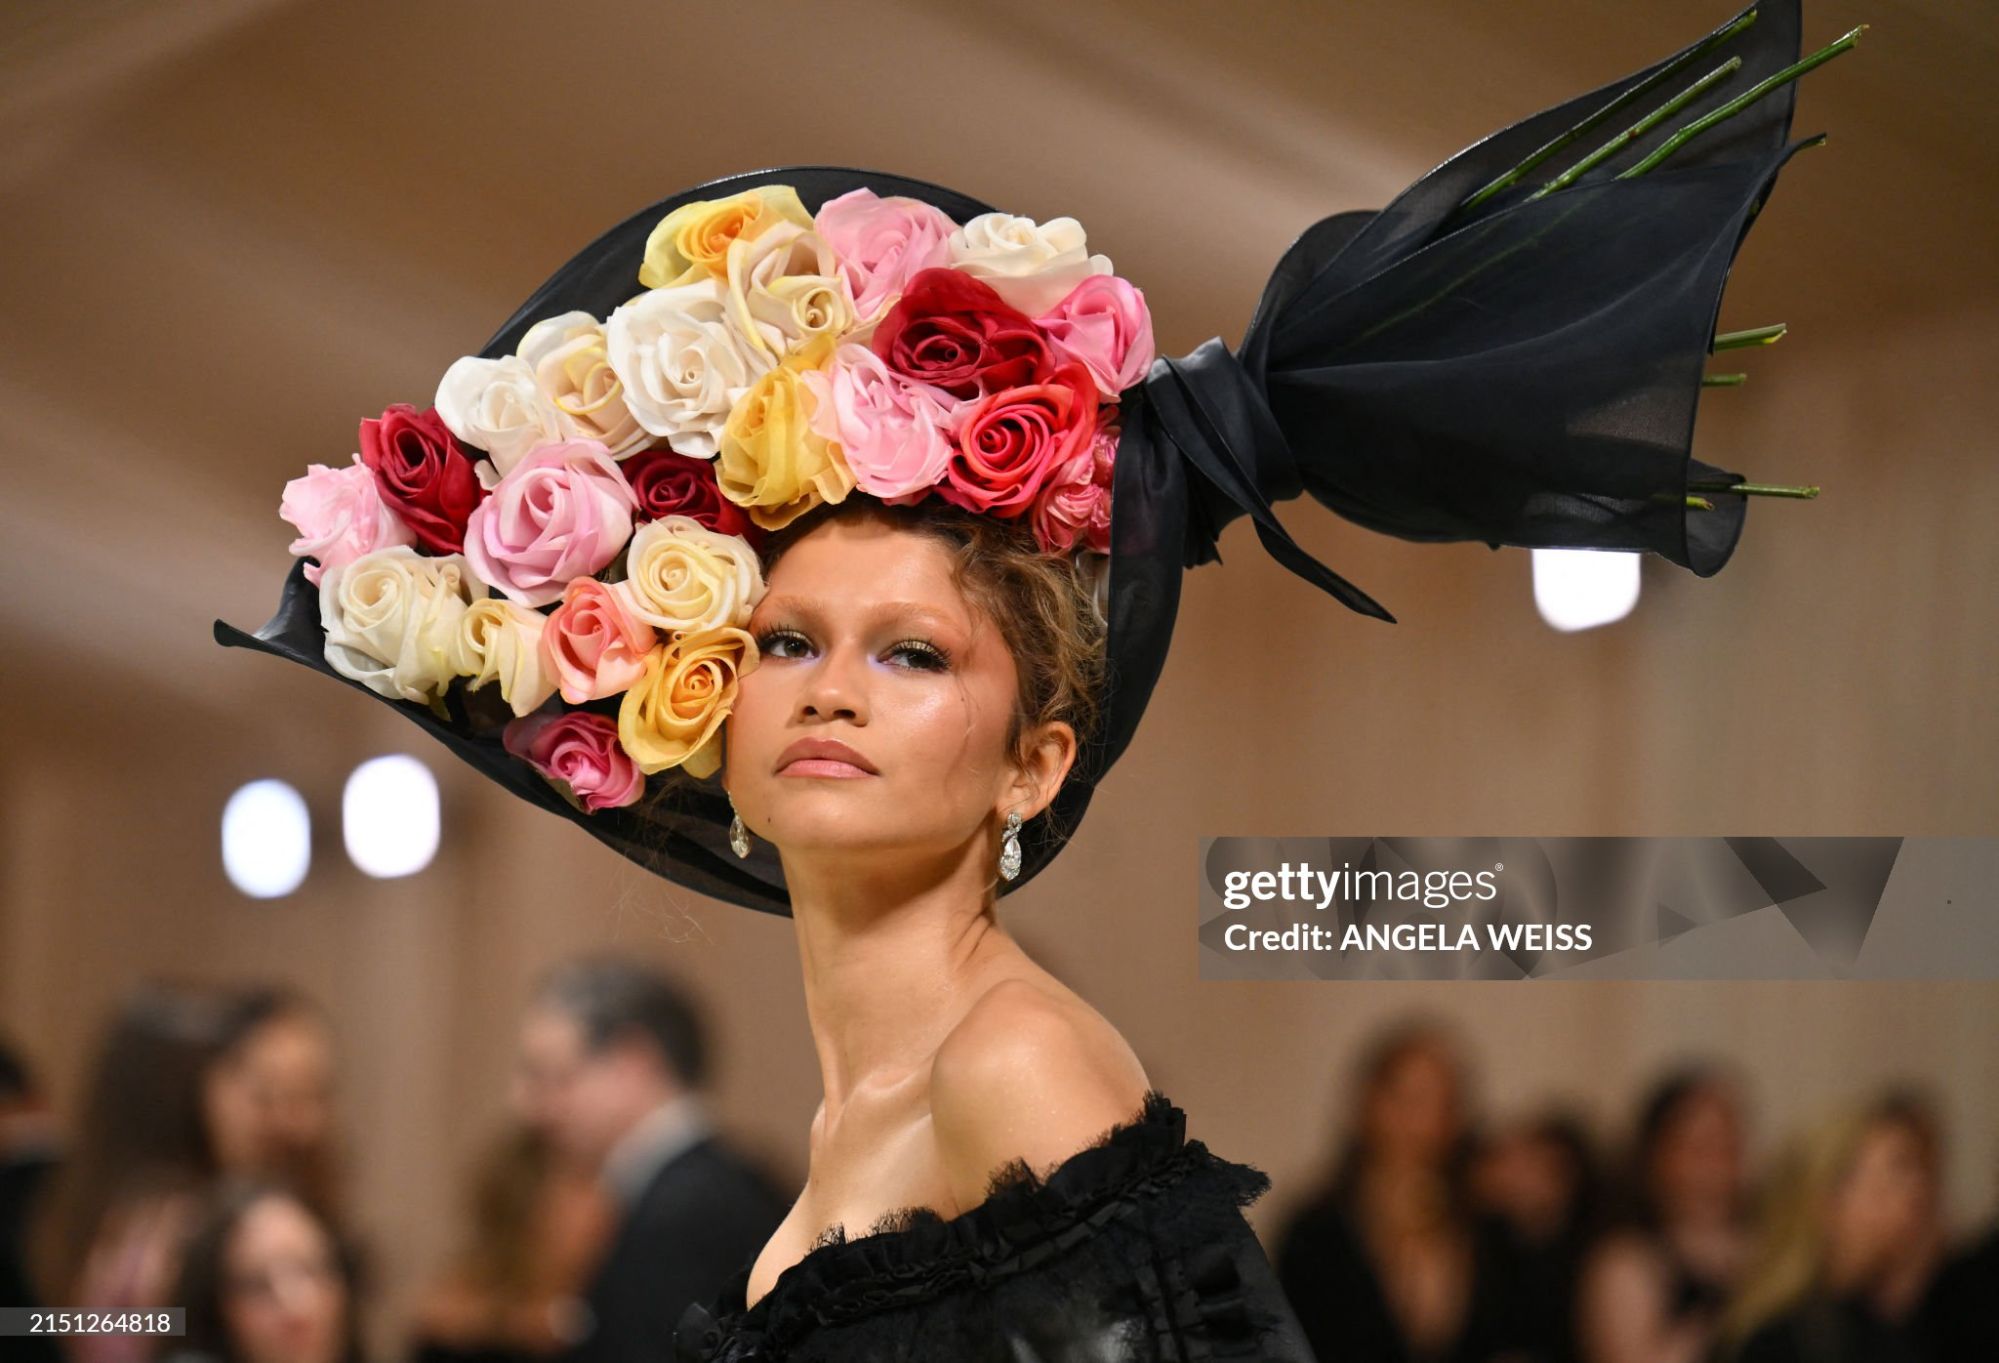 gettyimages-2151264818-2048x2048.jpg